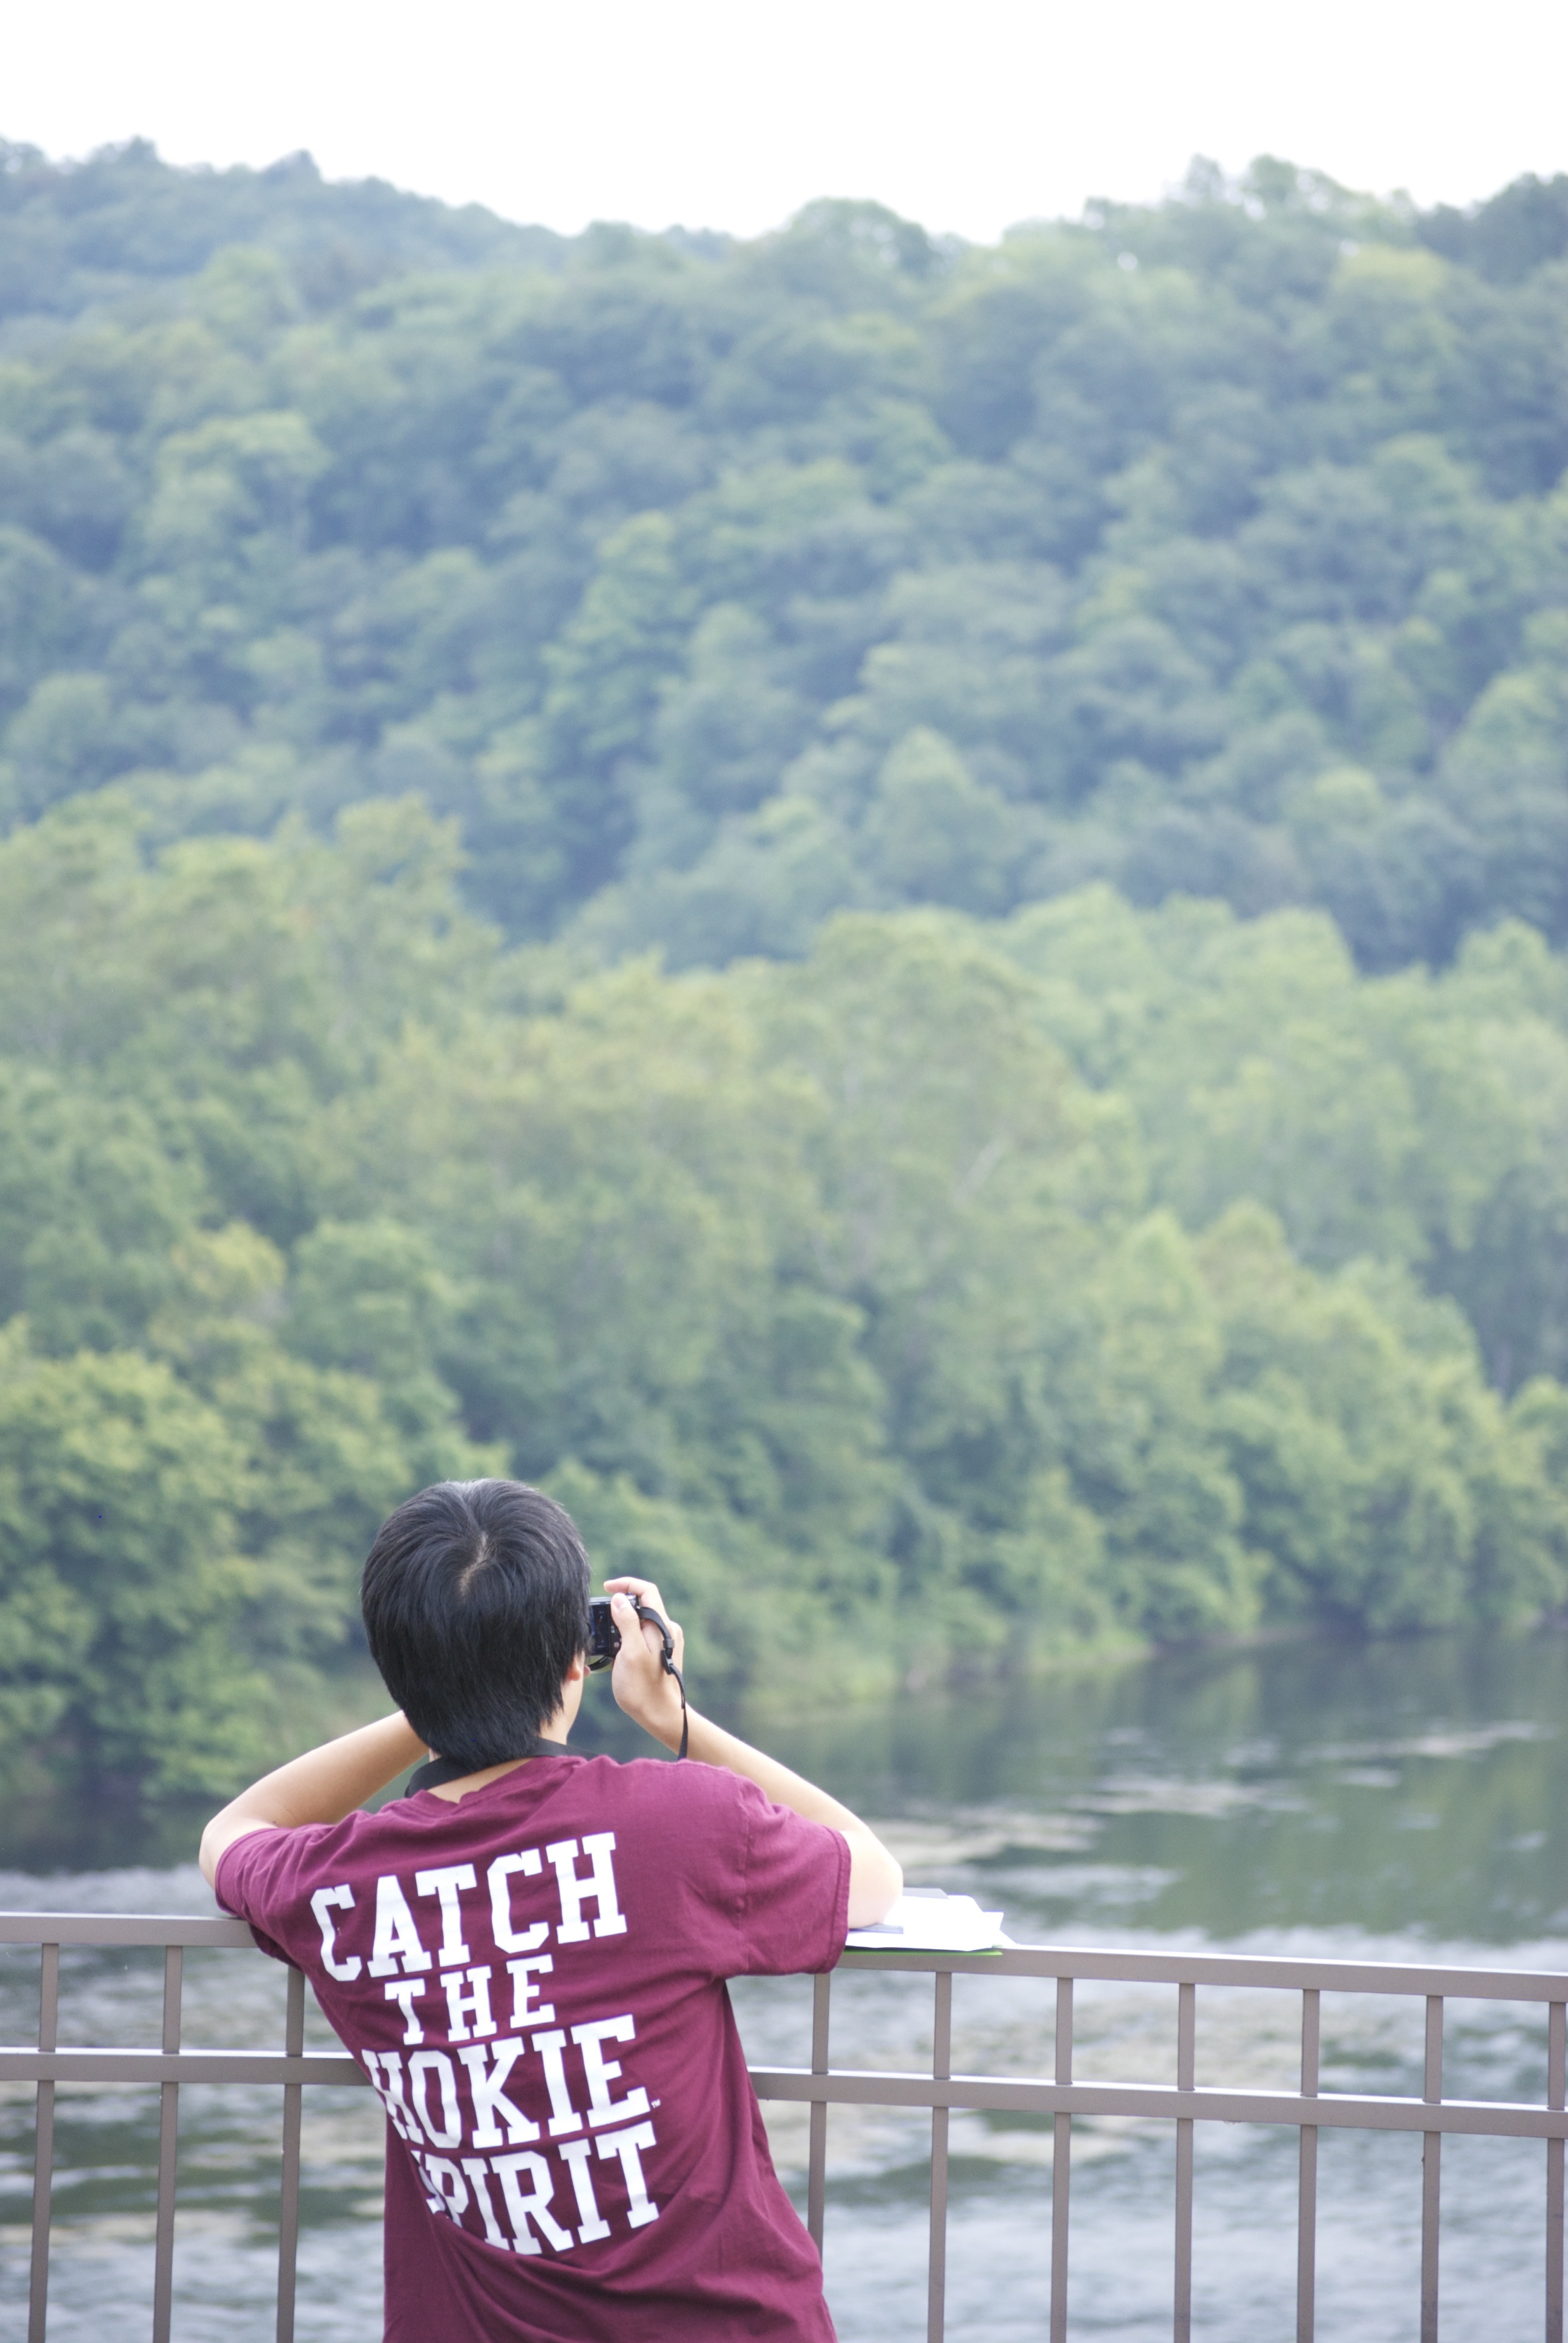 Student stands on a bridge overlooking a river and takes a picture